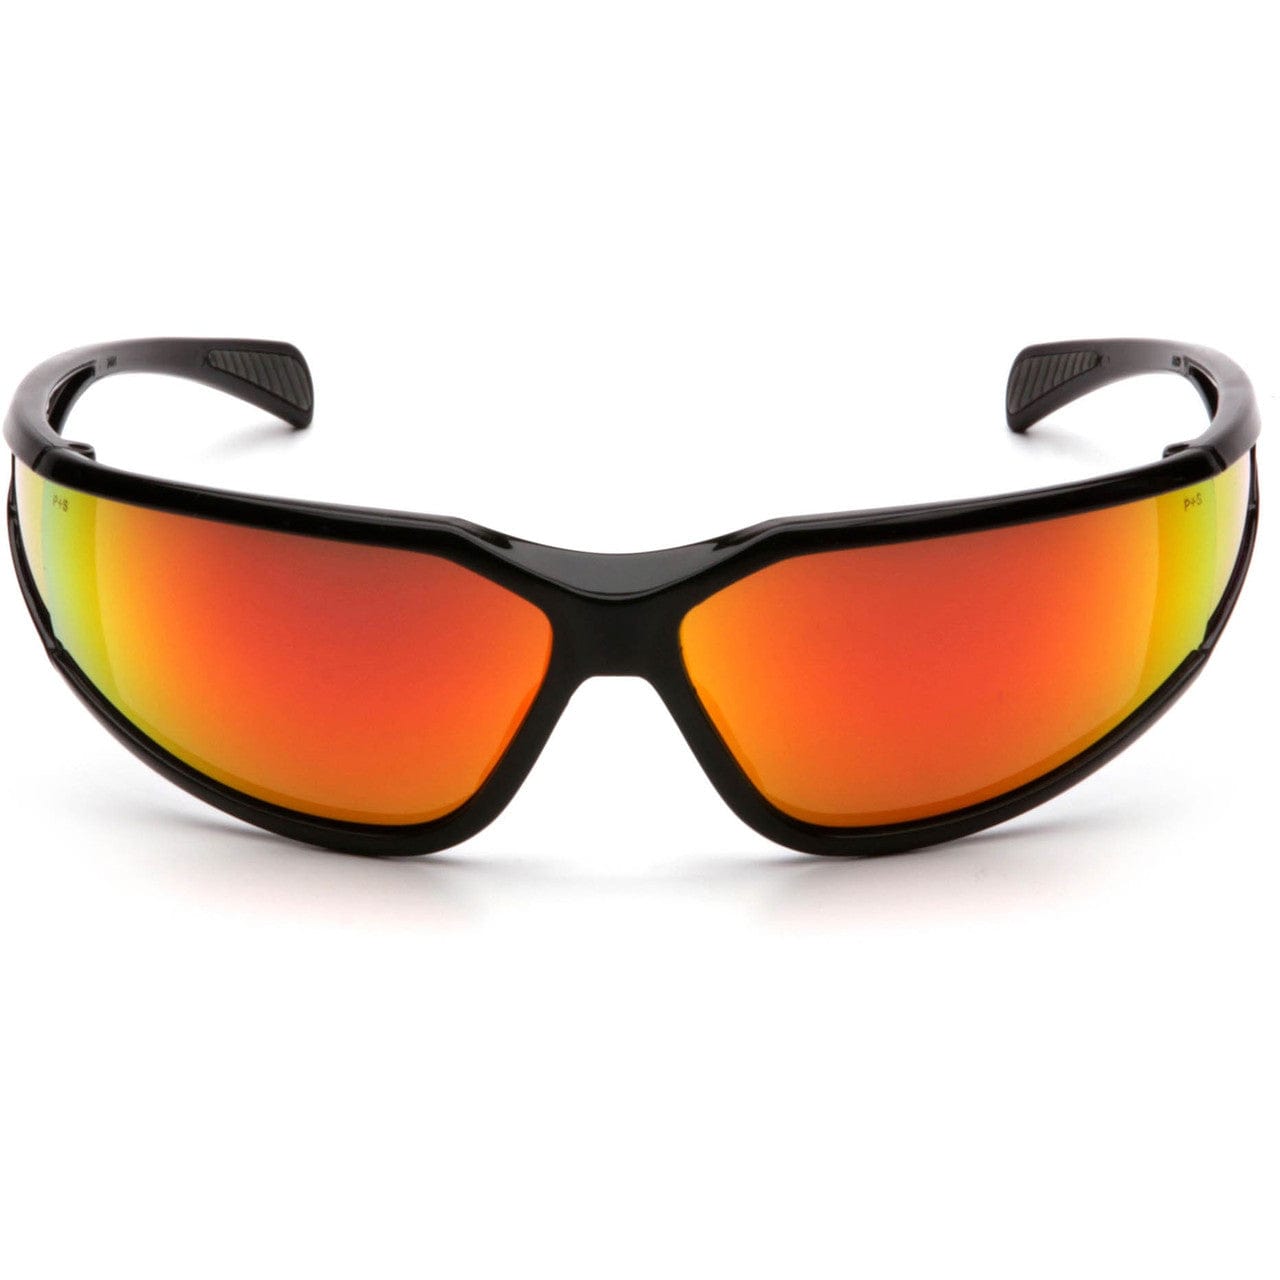 Pyramex Exeter Safety Glasses with Black Frame and Sky Red Mirror Anti-Fog Lens SB5155DT Front